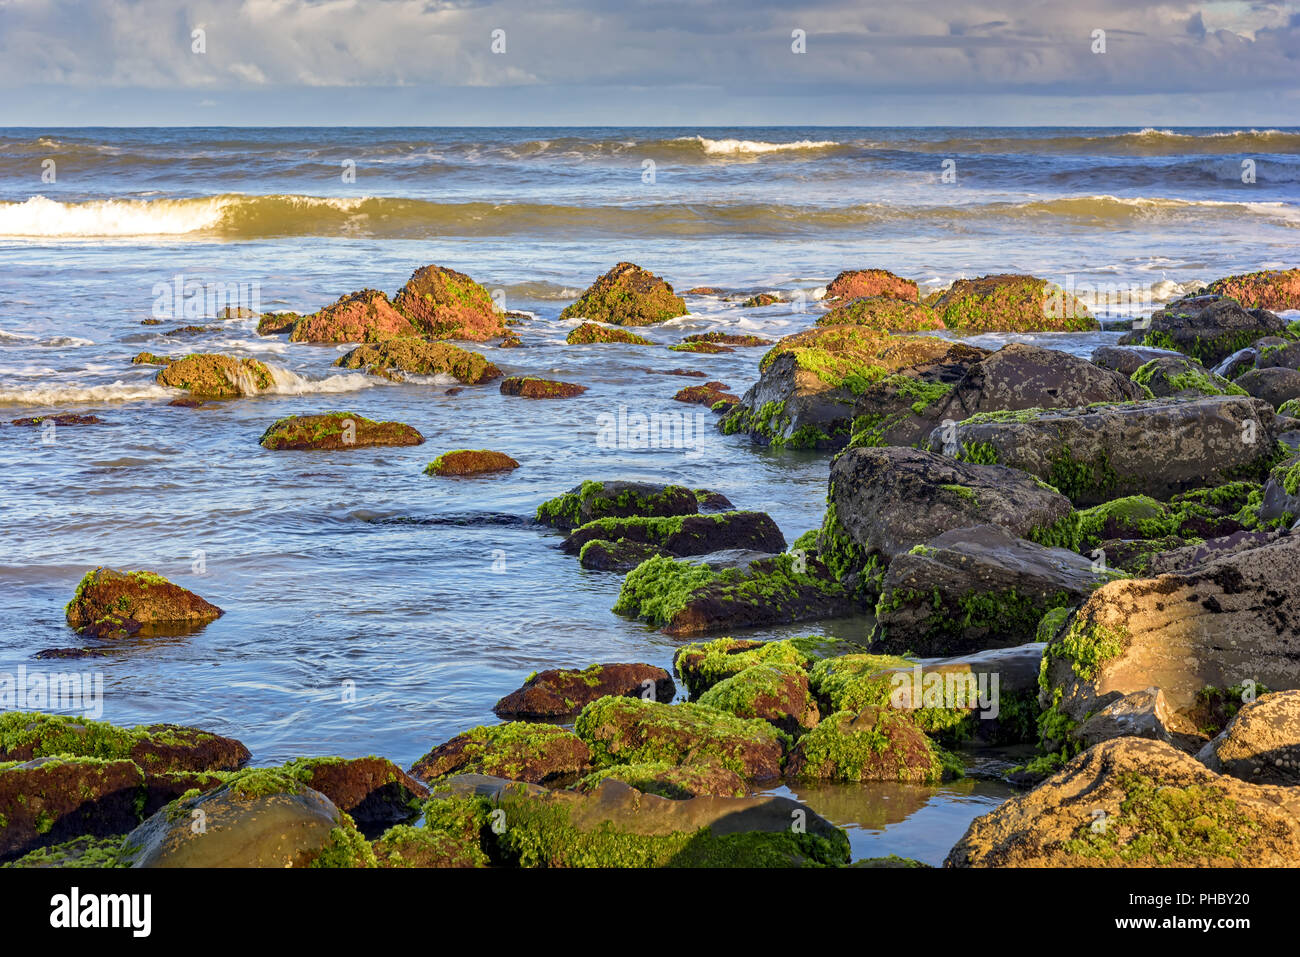 Stones and water with horizon line of Torres city Stock Photo